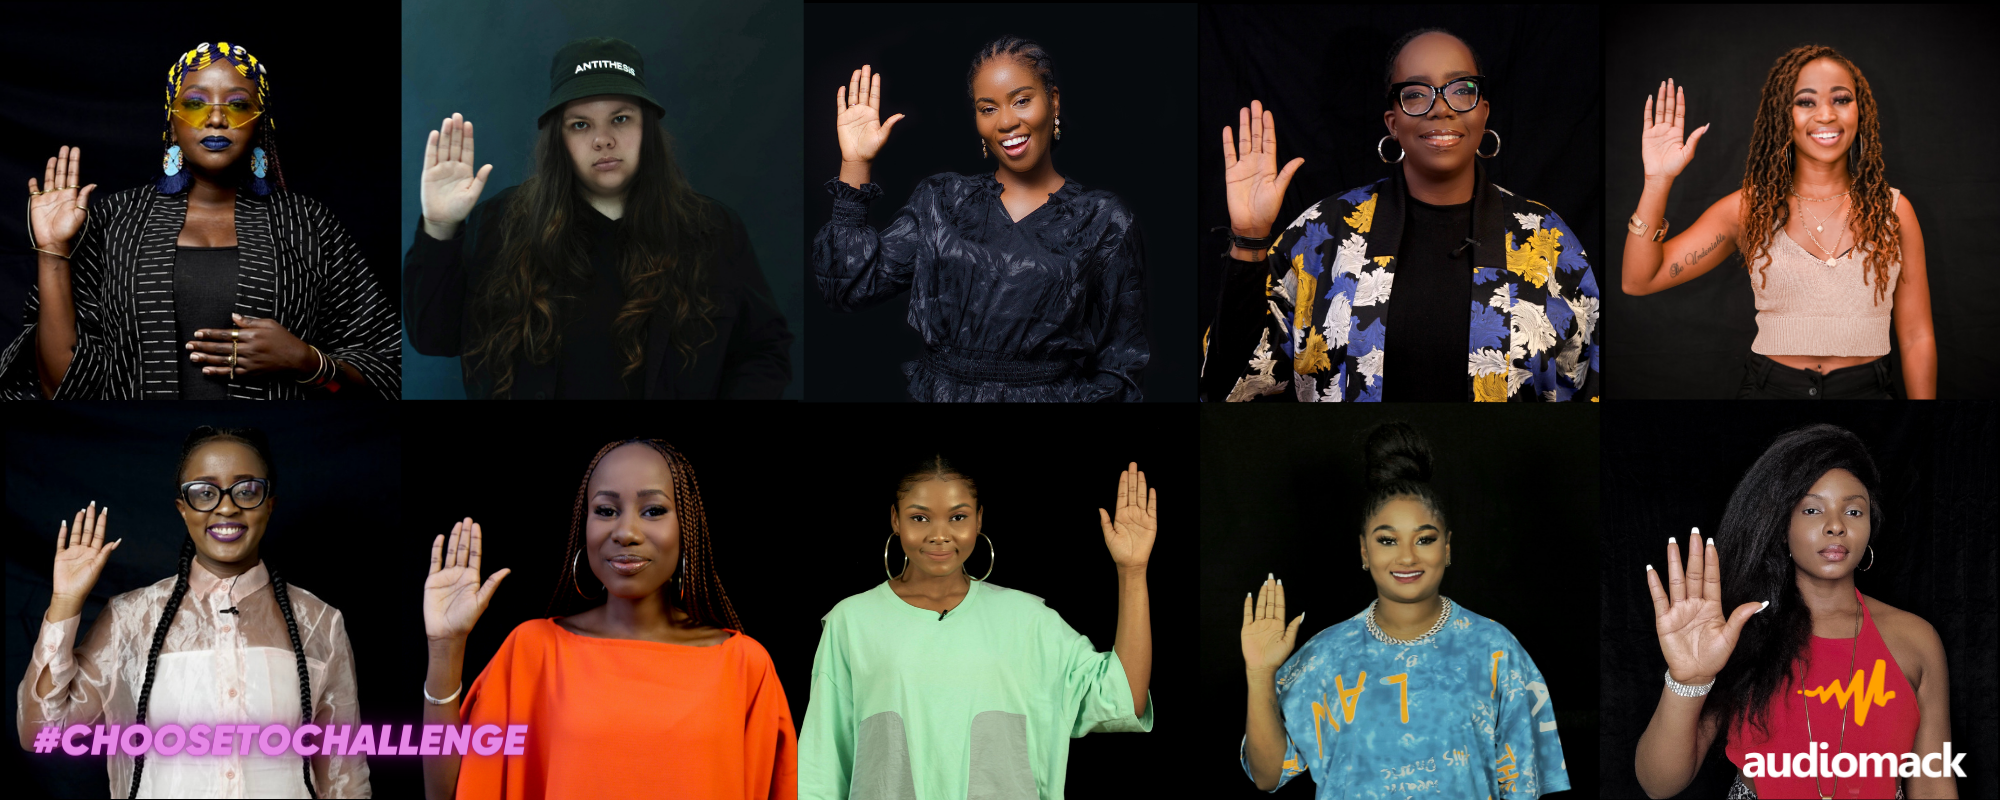 In honour of Women’s History Month, Audiomack spotlights Women breaking ground in the Music Industry | Here’s the full list